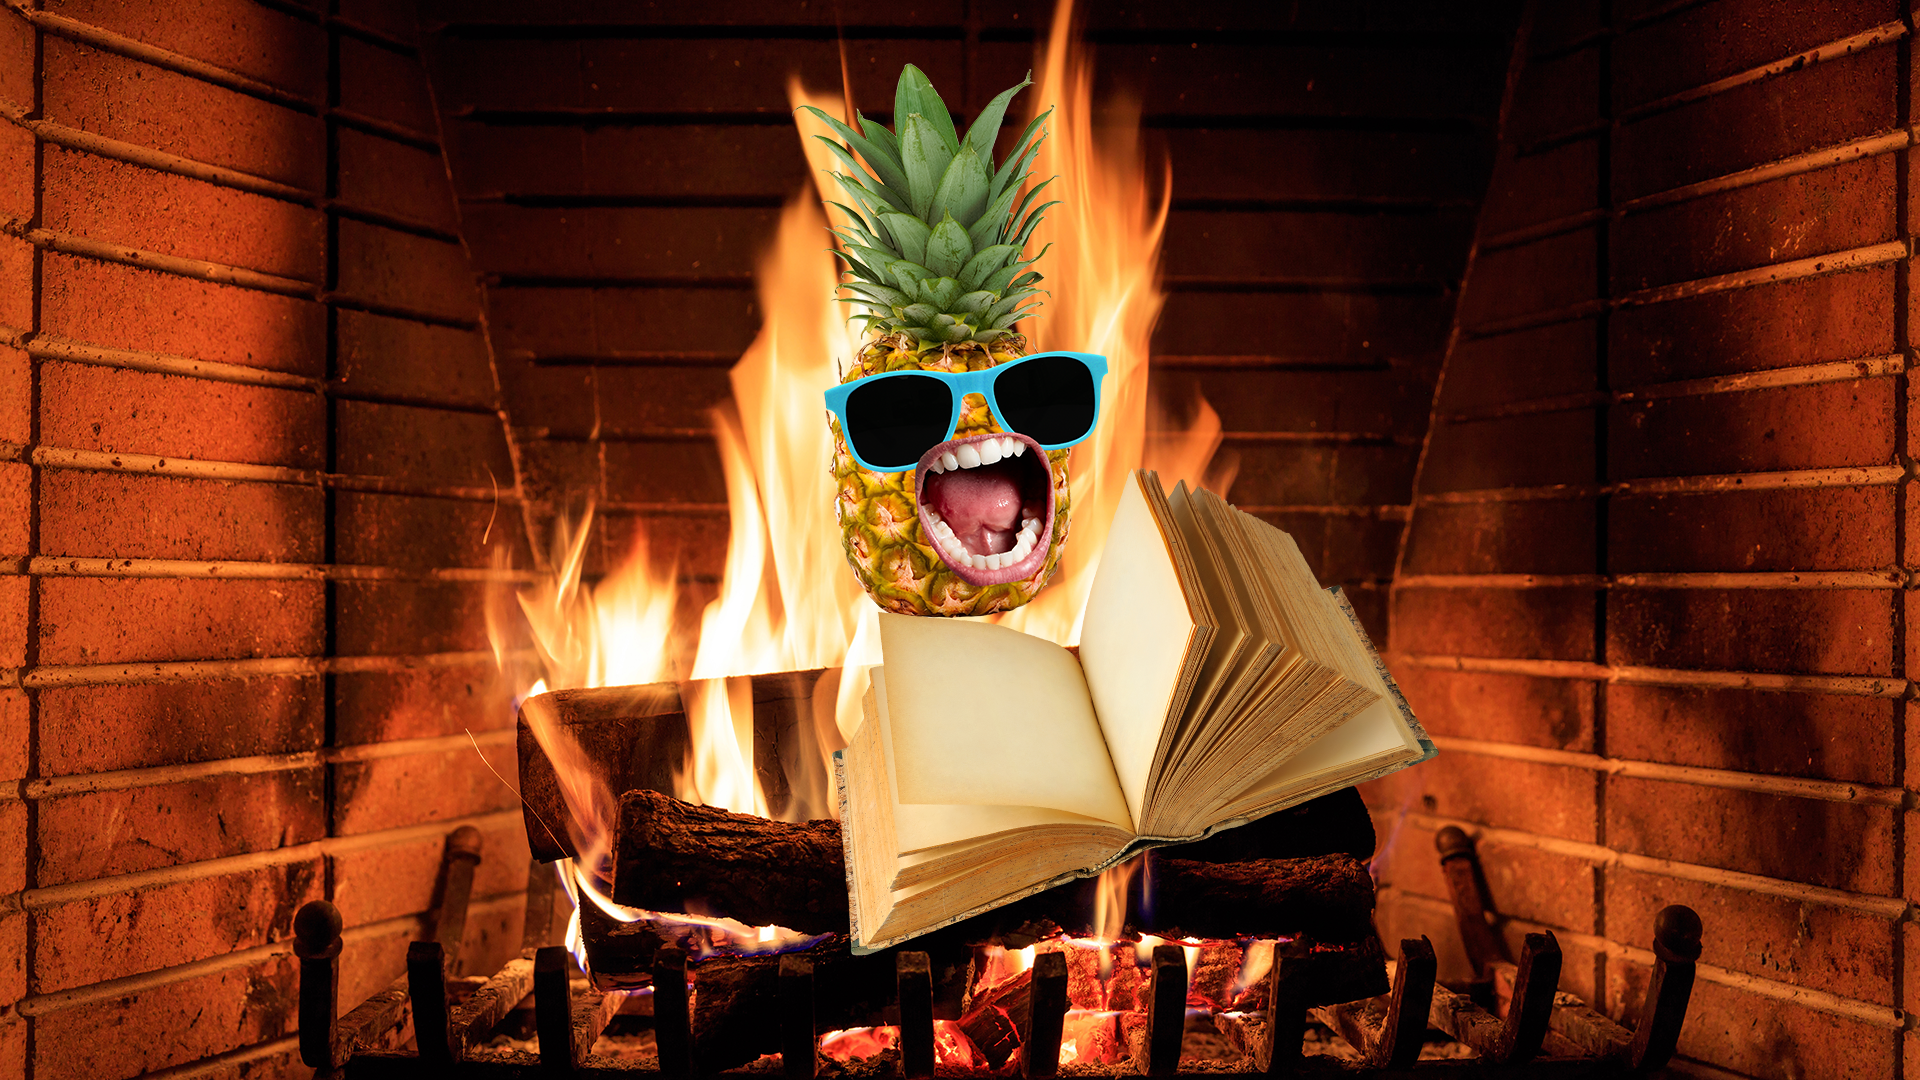 Book and pineapple in fireplace 